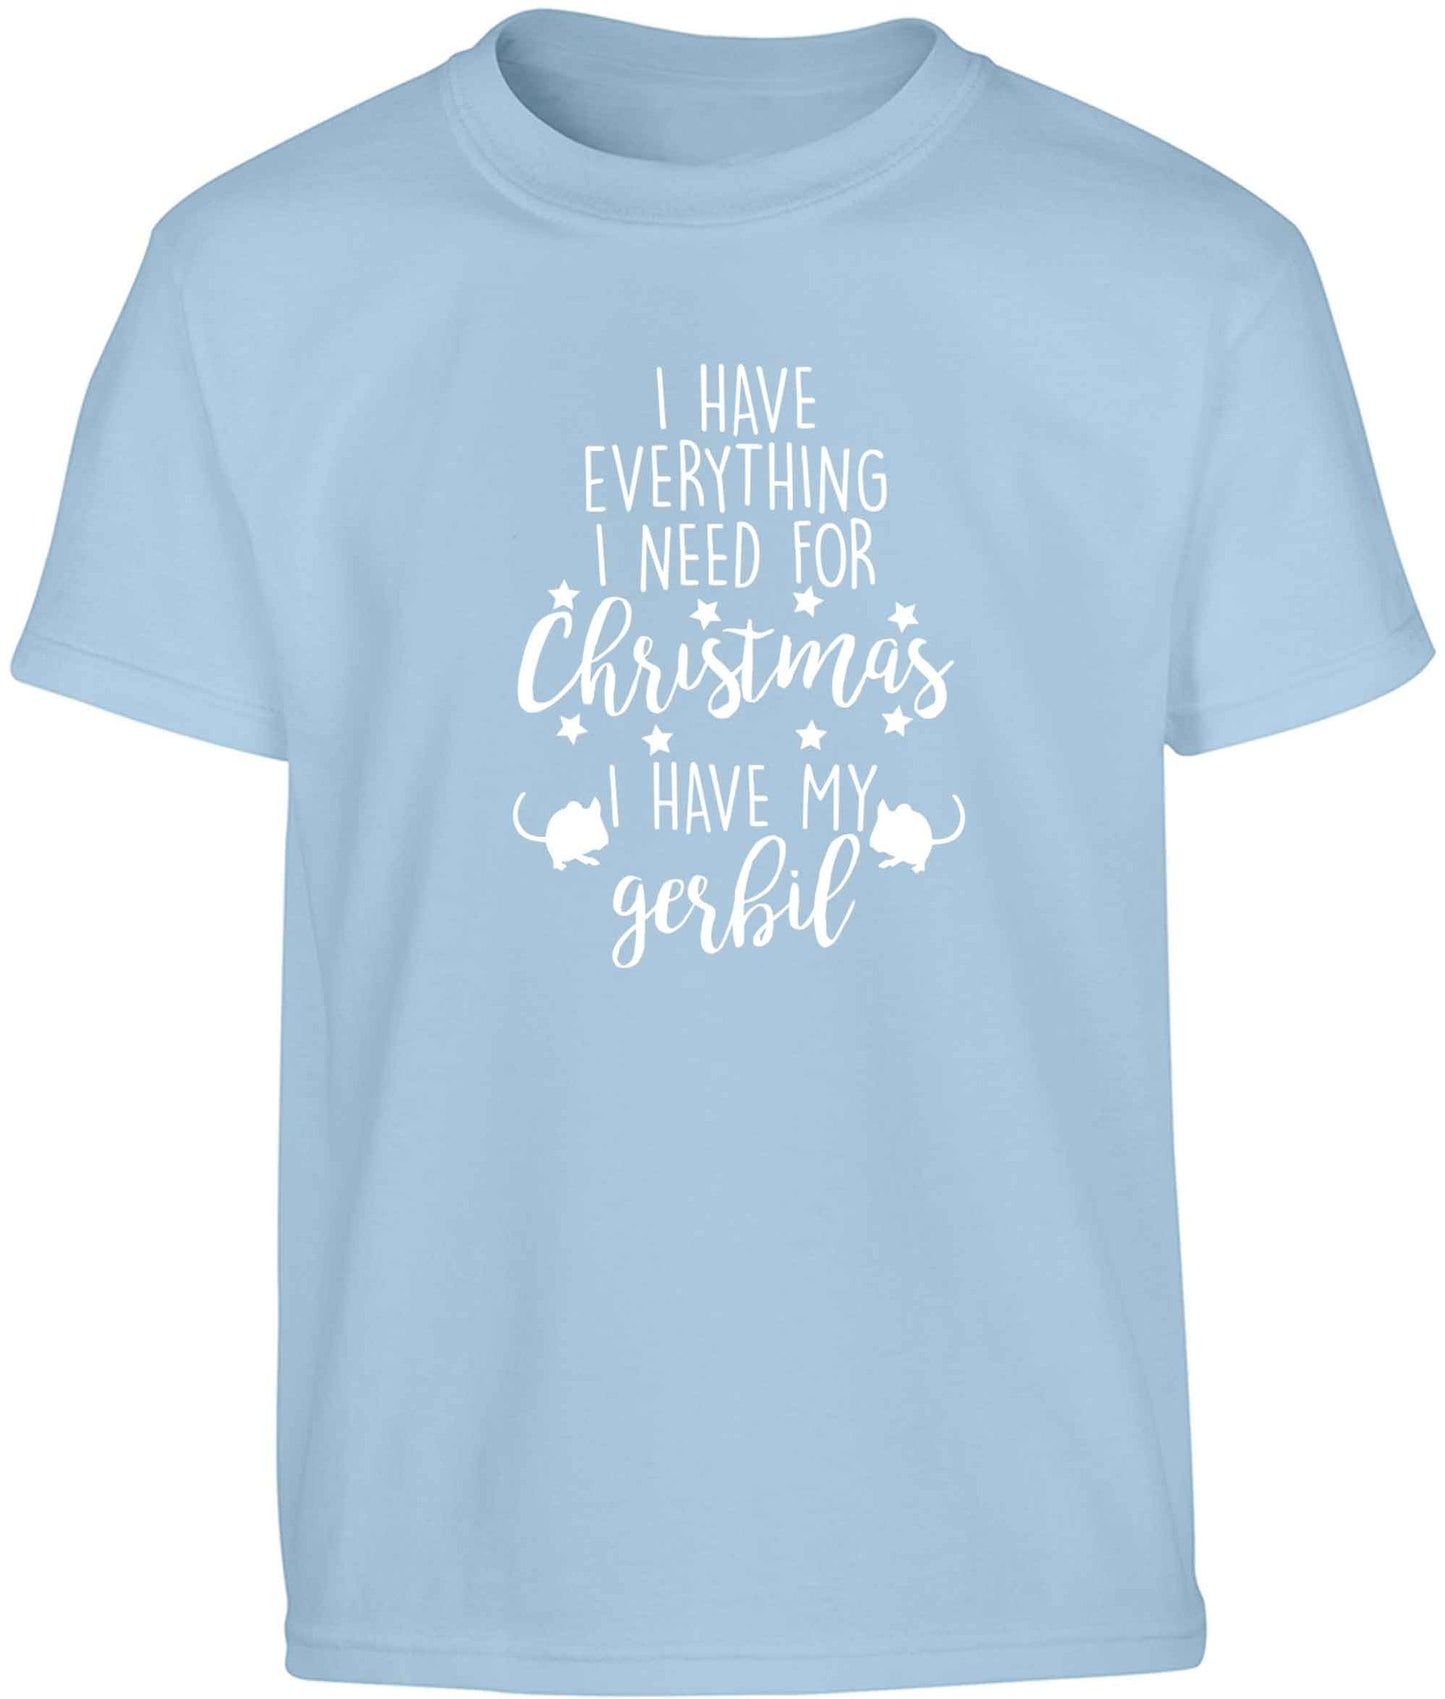 I have everything I need for Christmas I have my gerbil Children's light blue Tshirt 12-13 Years